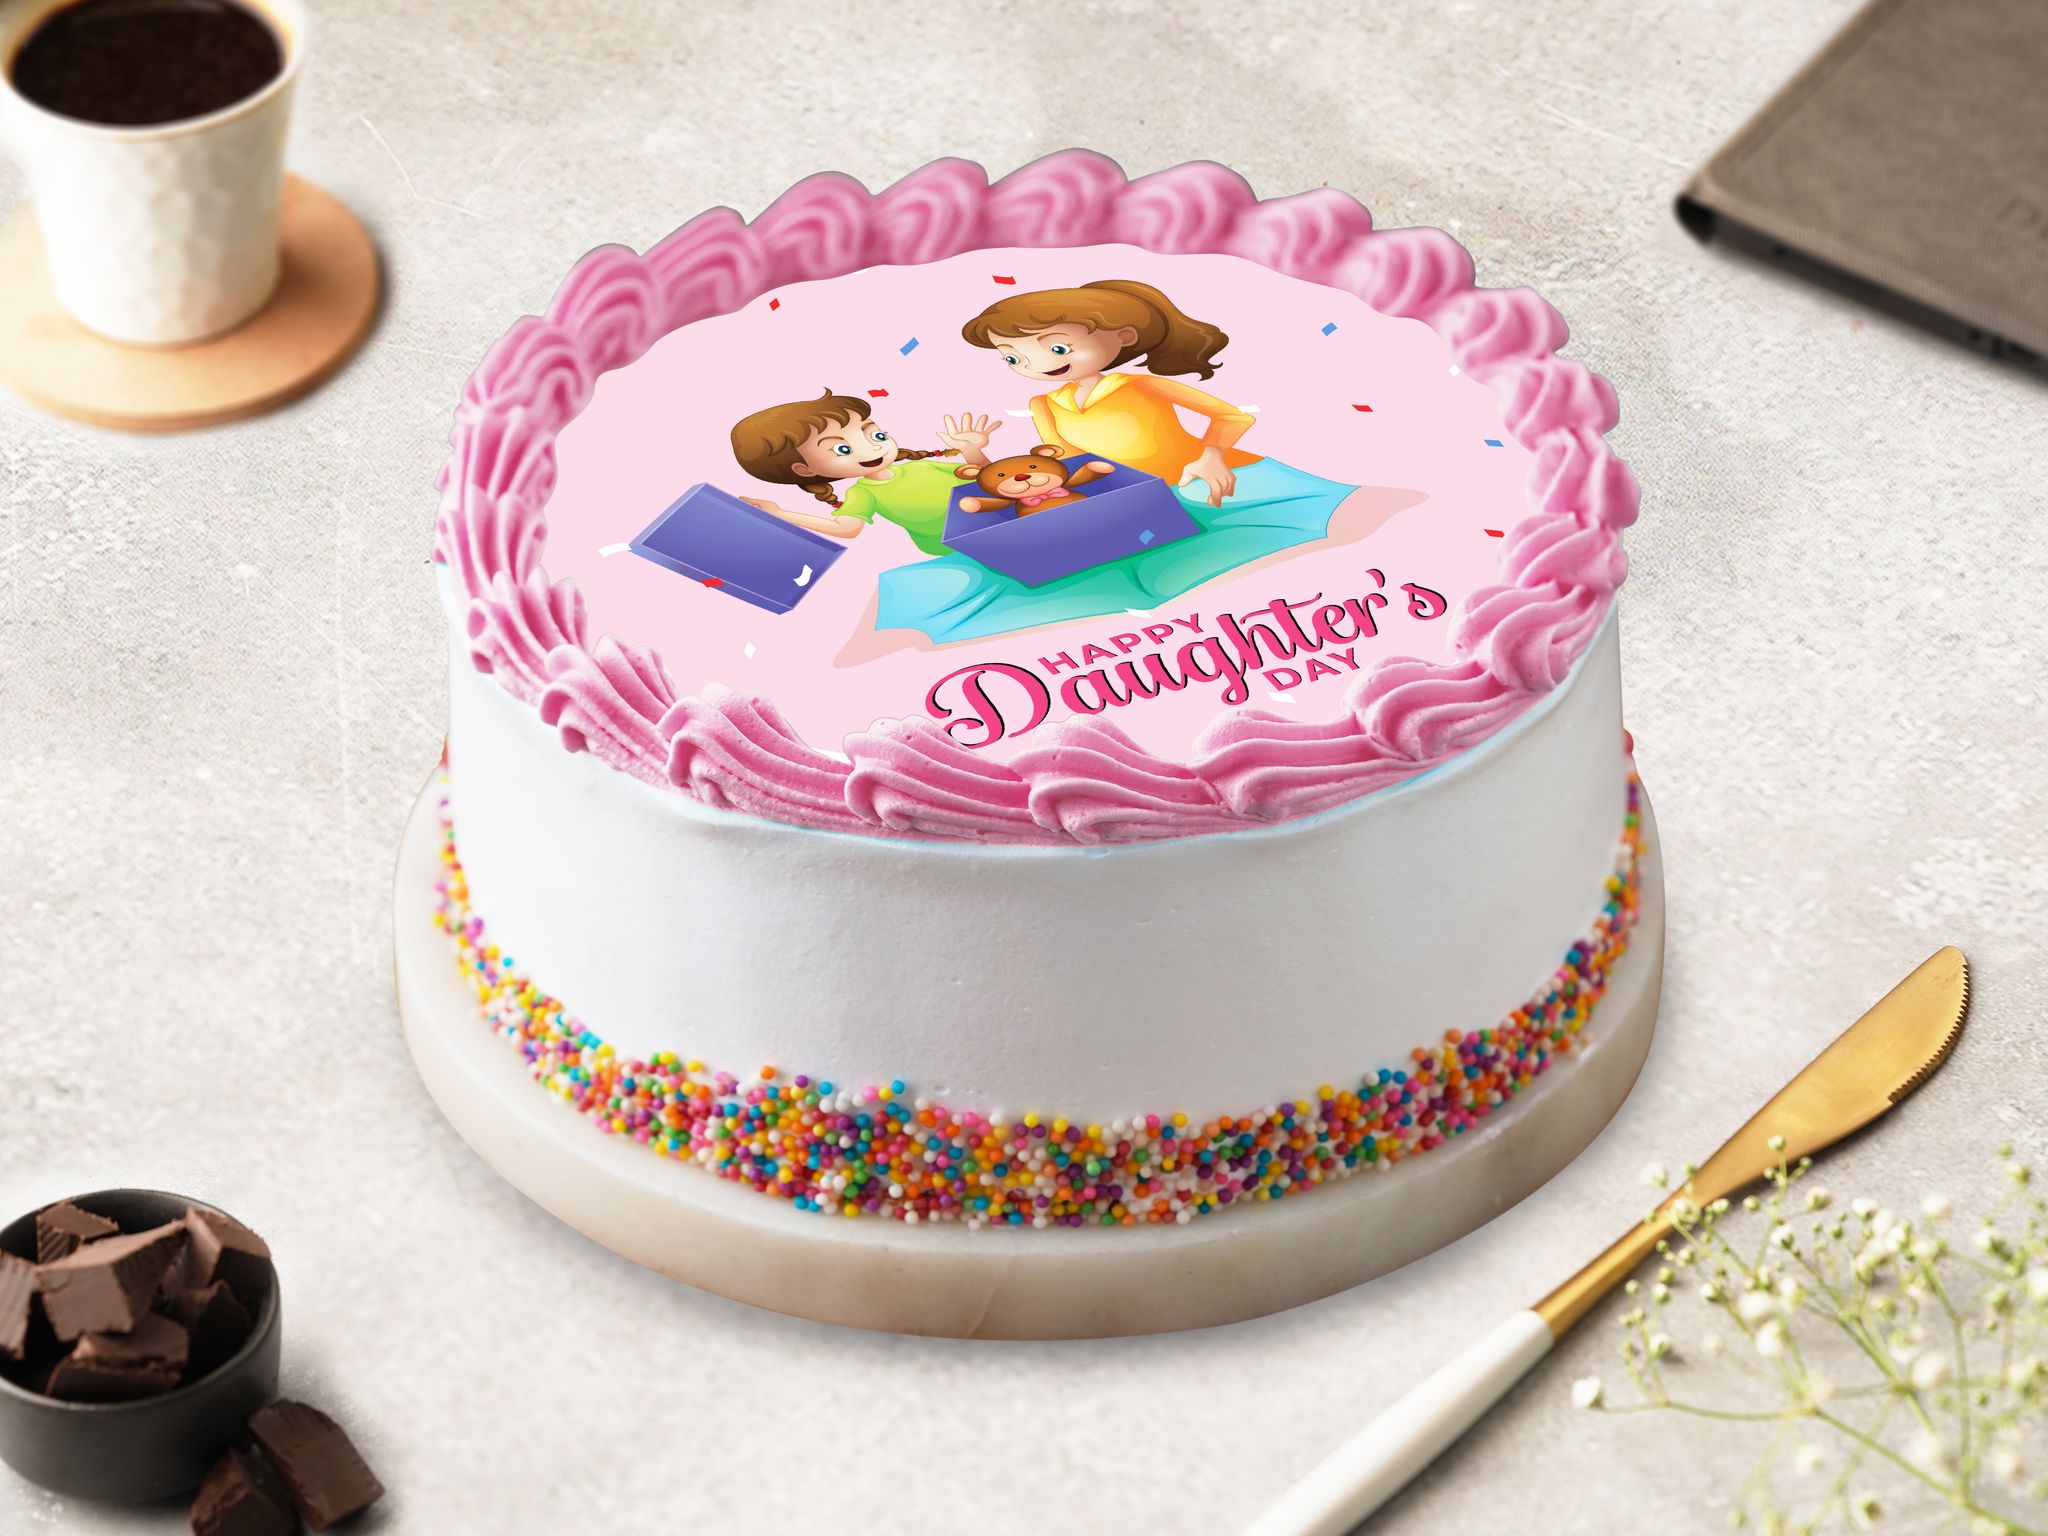 Daughter's Day Cake Online | Cake for Daughters Day - FNP